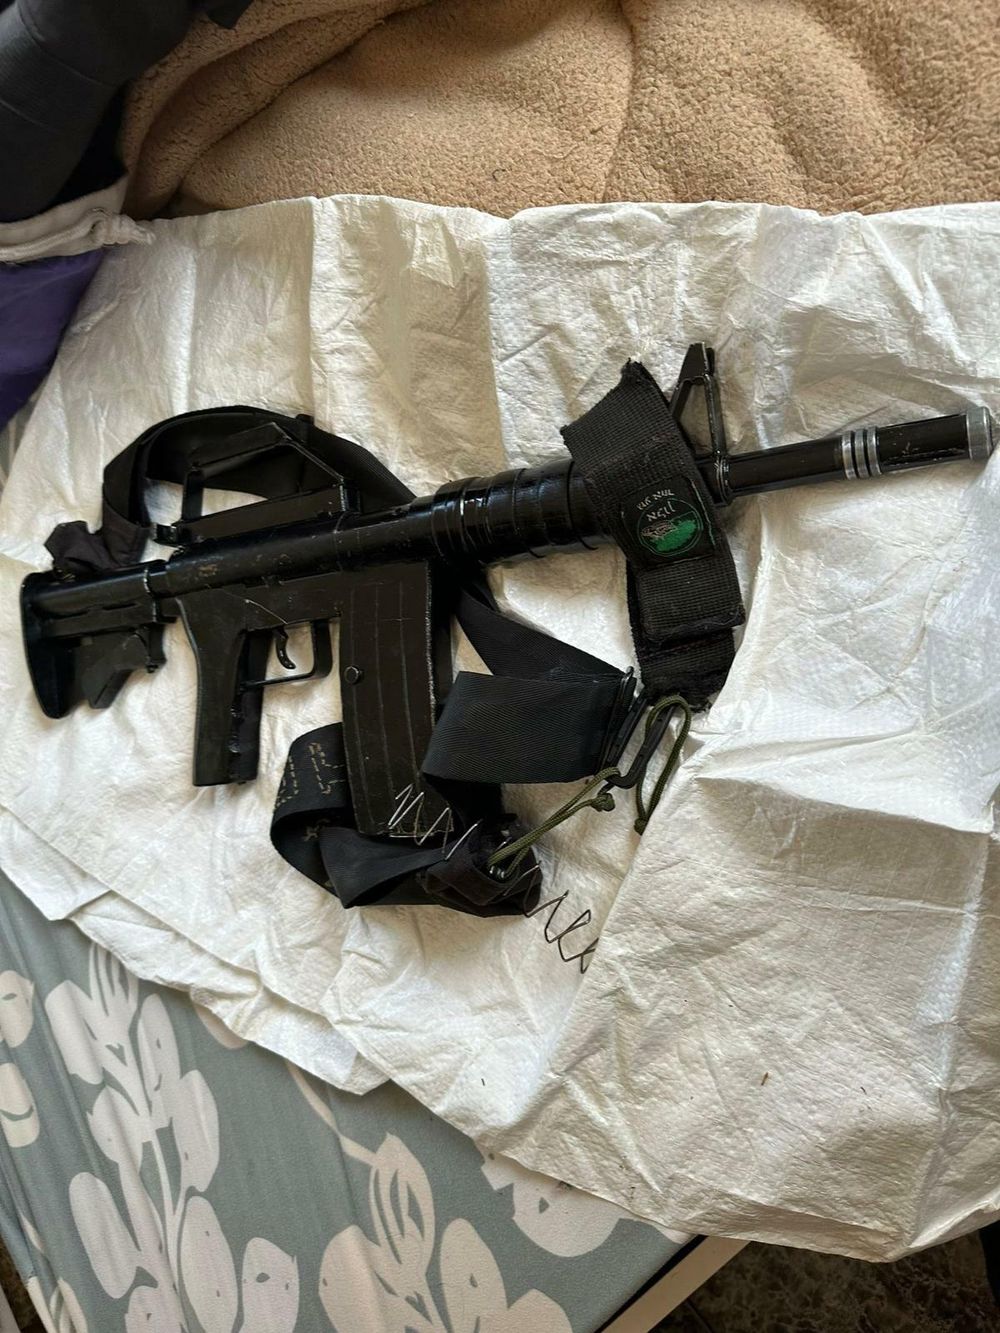 Weapon confiscated during West Bank raid on February 12.